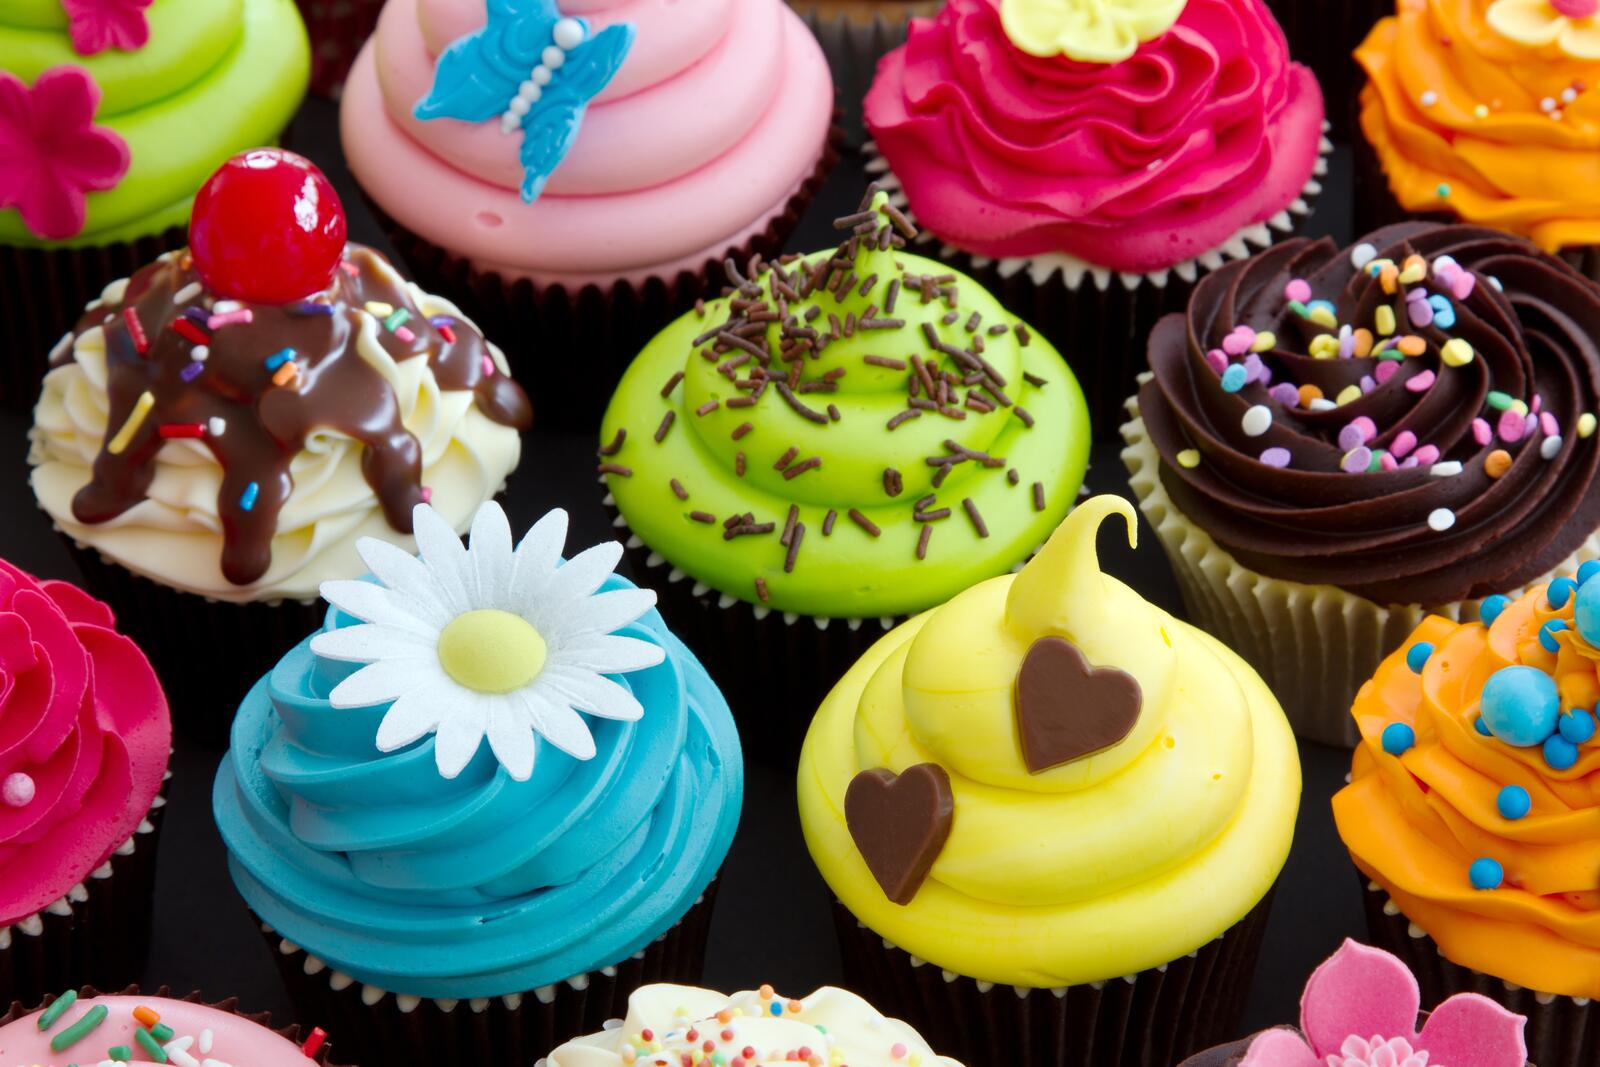 Wallpapers wallpaper cupcakes chocolate sweets on the desktop